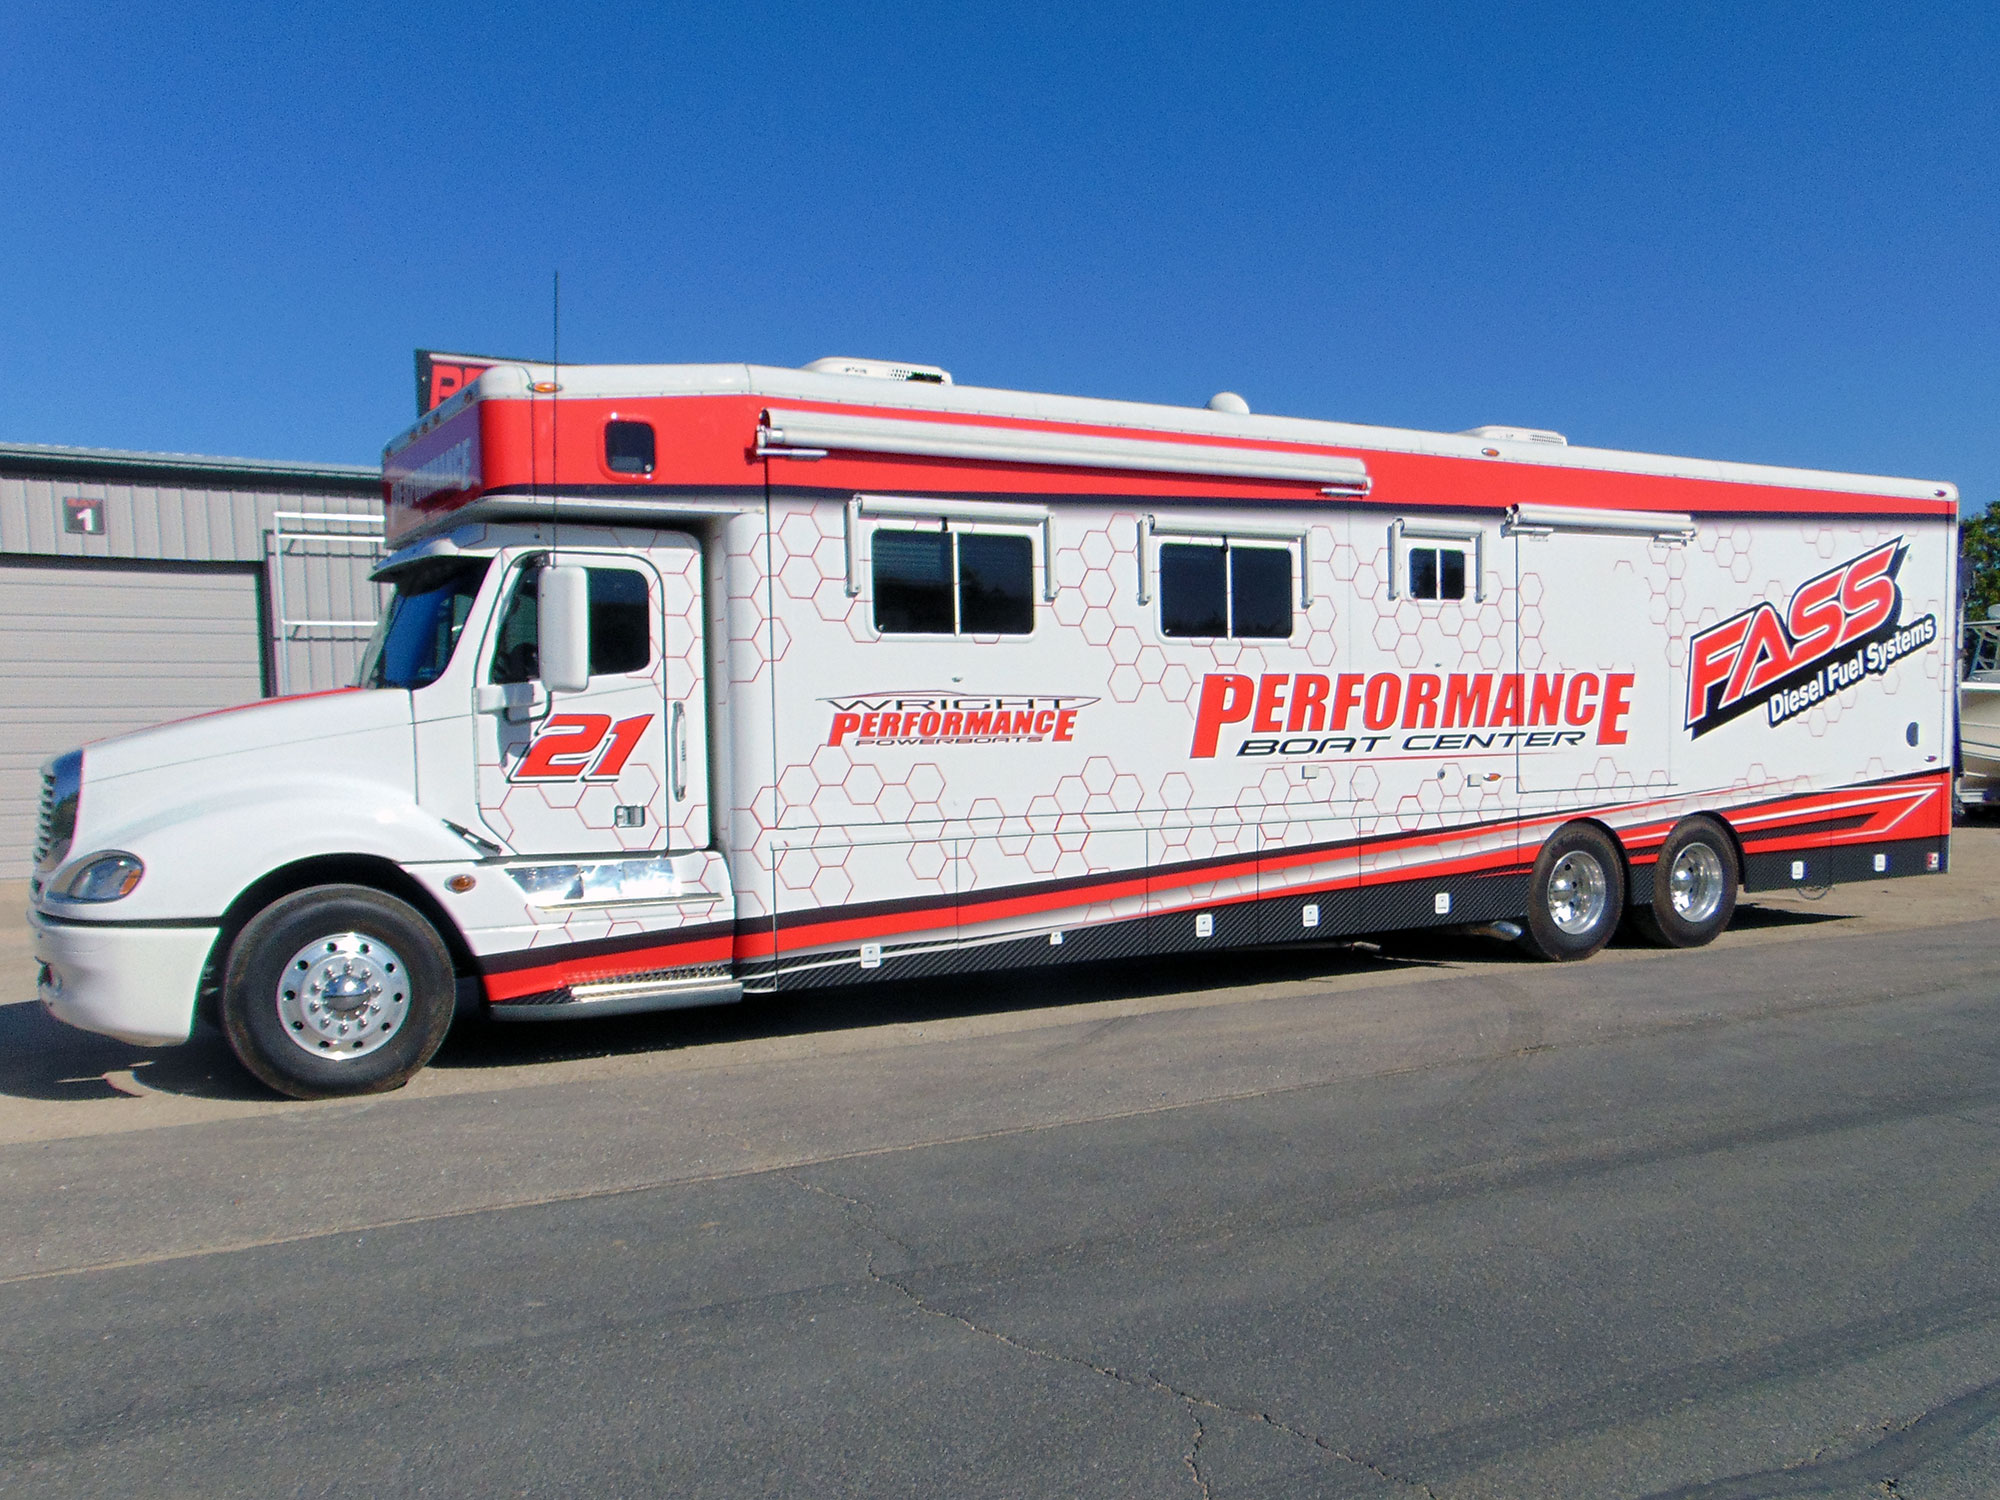 Wright Performance Bus Wrapping Motor Sports Racing High Performance Pro Dezigns Columbia Missouri